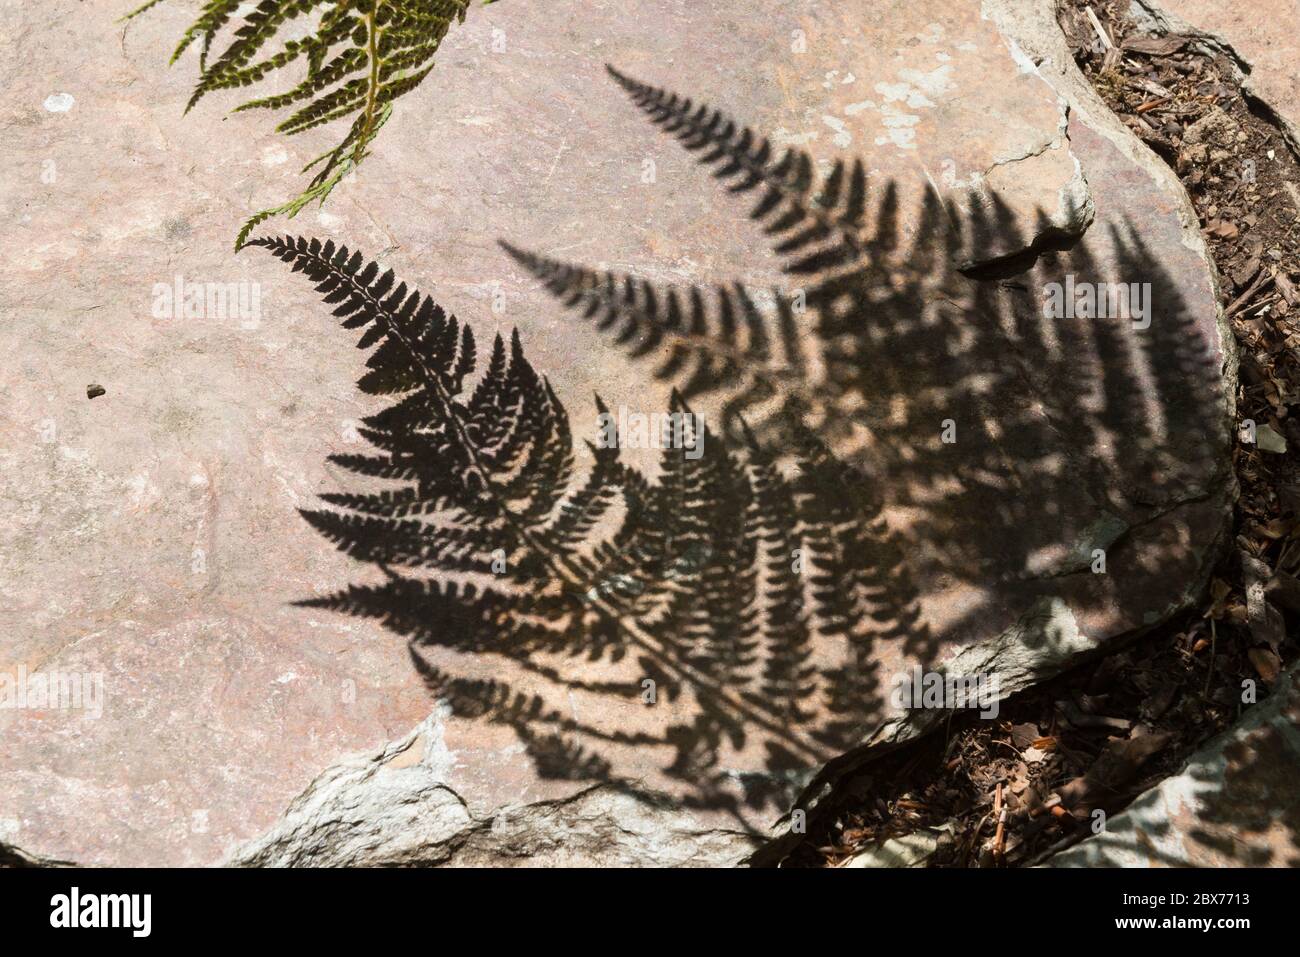 Tip of decorative garden fern in bright sunshine casts shadows  on brown stone crazy paving. Stock Photo